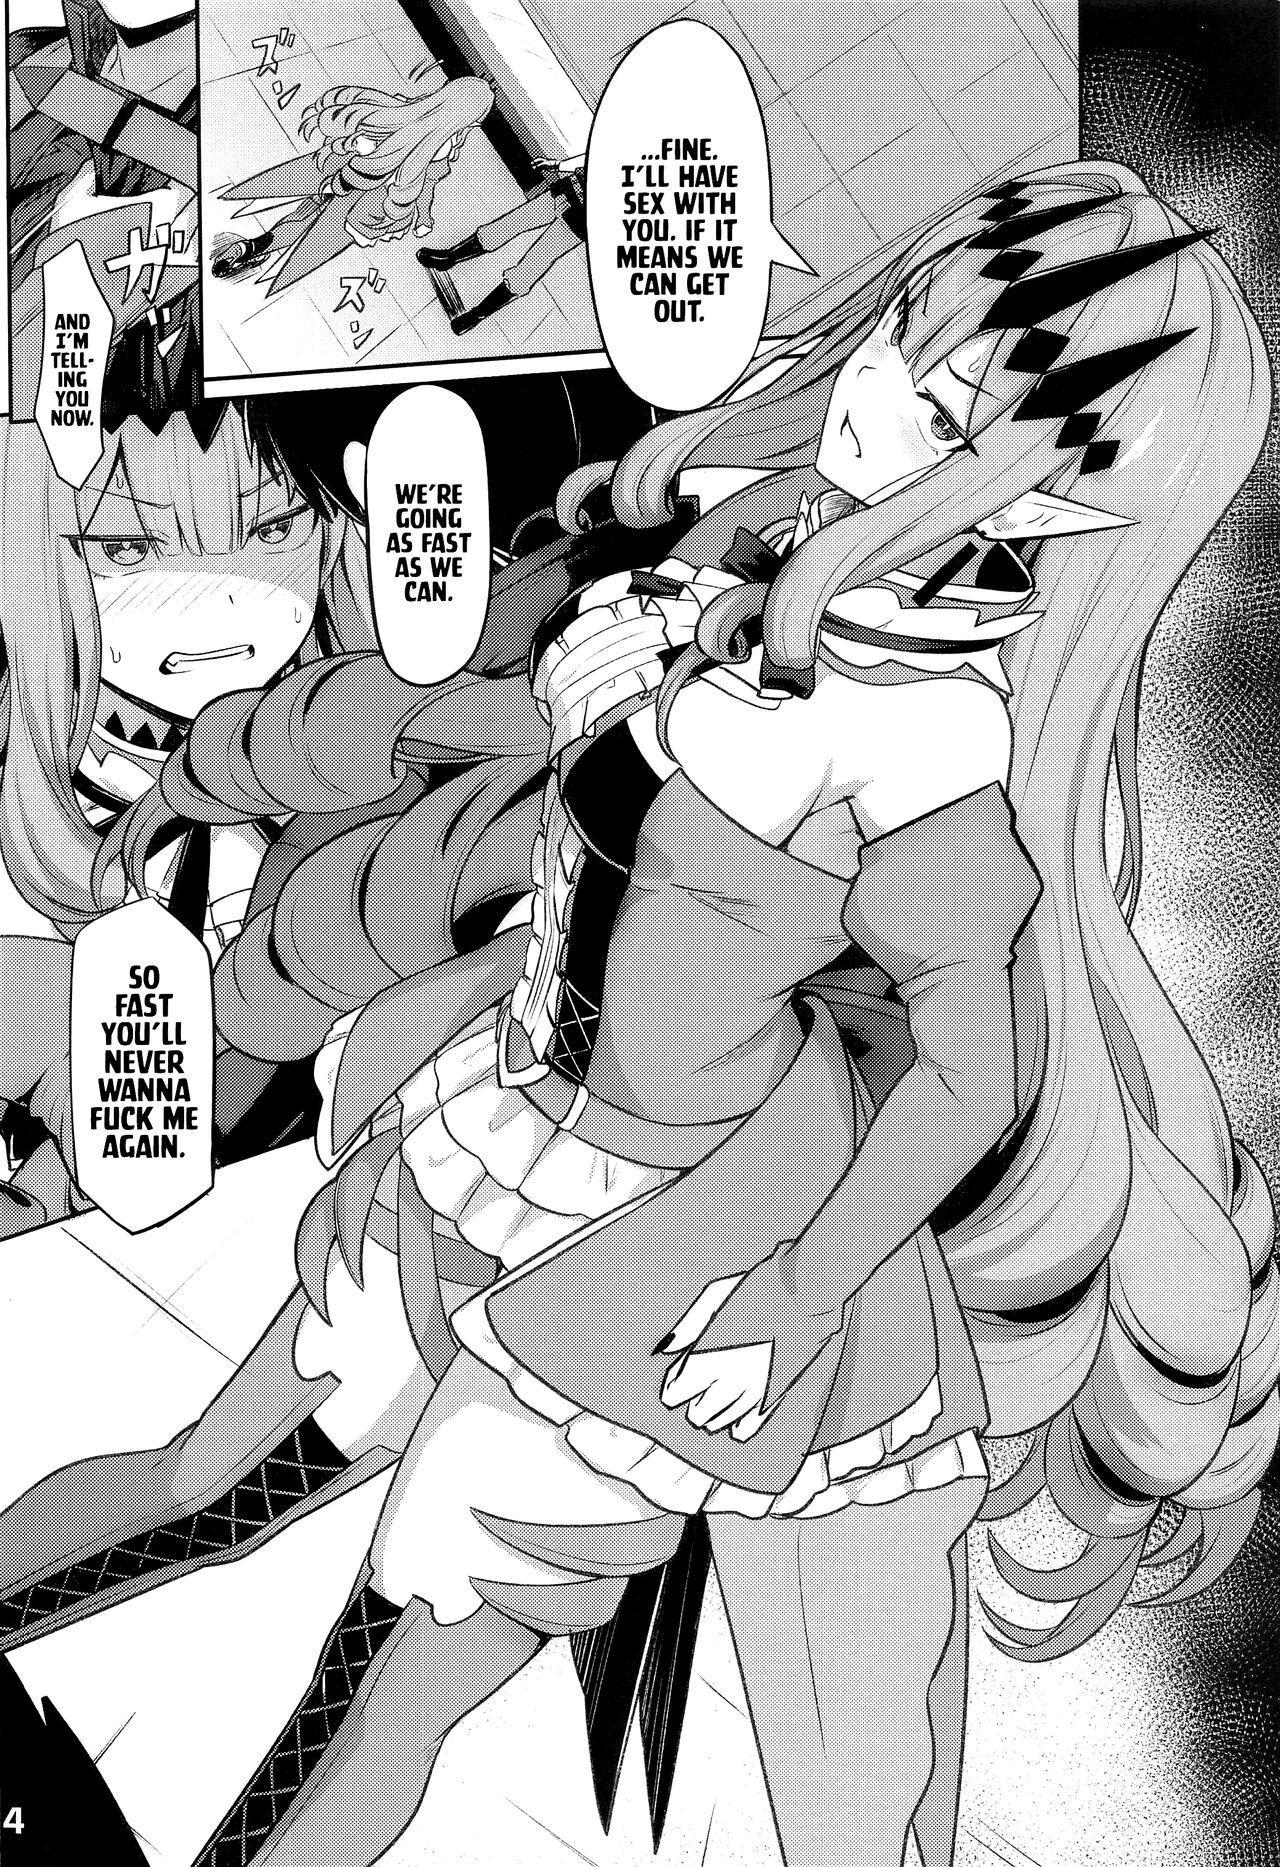 Pinoy Baobhan Sith to SEX Shinai to Derarenai Heya | Baobhan Sith and I Need to Have Sex or Else We Can't Leave This Room! - Fate grand order Women Sucking - Page 5